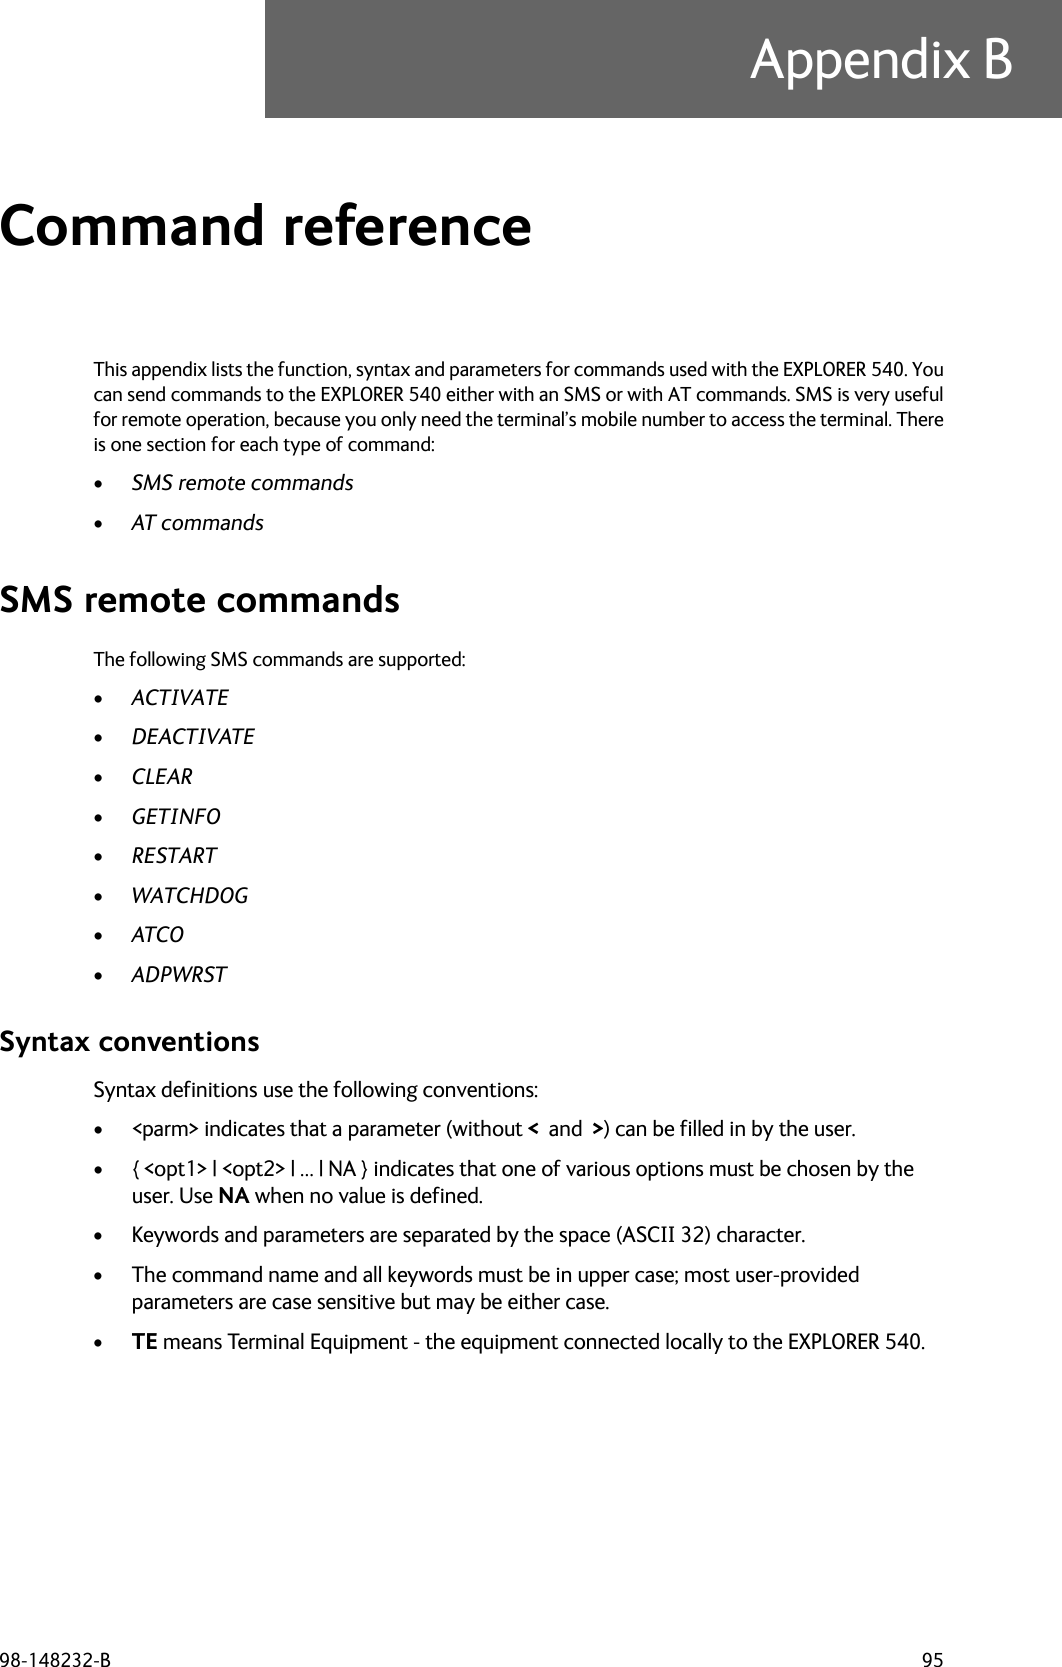 98-148232-B 95Appendix BCommand reference BThis appendix lists the function, syntax and parameters for commands used with the EXPLORER 540. Youcan send commands to the EXPLORER 540 either with an SMS or with AT commands. SMS is very usefulfor remote operation, because you only need the terminal’s mobile number to access the terminal. Thereis one section for each type of command:•SMS remote commands•AT commands SMS remote commandsThe following SMS commands are supported:•ACTIVATE•DEACTIVATE•CLEAR•GETINFO•RESTART•WATCHDOG•ATCO•ADPWRST Syntax conventionsSyntax definitions use the following conventions:• &lt;parm&gt; indicates that a parameter (without &lt;  and  &gt;) can be filled in by the user.• { &lt;opt1&gt; | &lt;opt2&gt; | … | NA } indicates that one of various options must be chosen by the user. Use NA when no value is defined.• Keywords and parameters are separated by the space (ASCII 32) character.• The command name and all keywords must be in upper case; most user-provided parameters are case sensitive but may be either case.•TE means Terminal Equipment - the equipment connected locally to the EXPLORER 540.